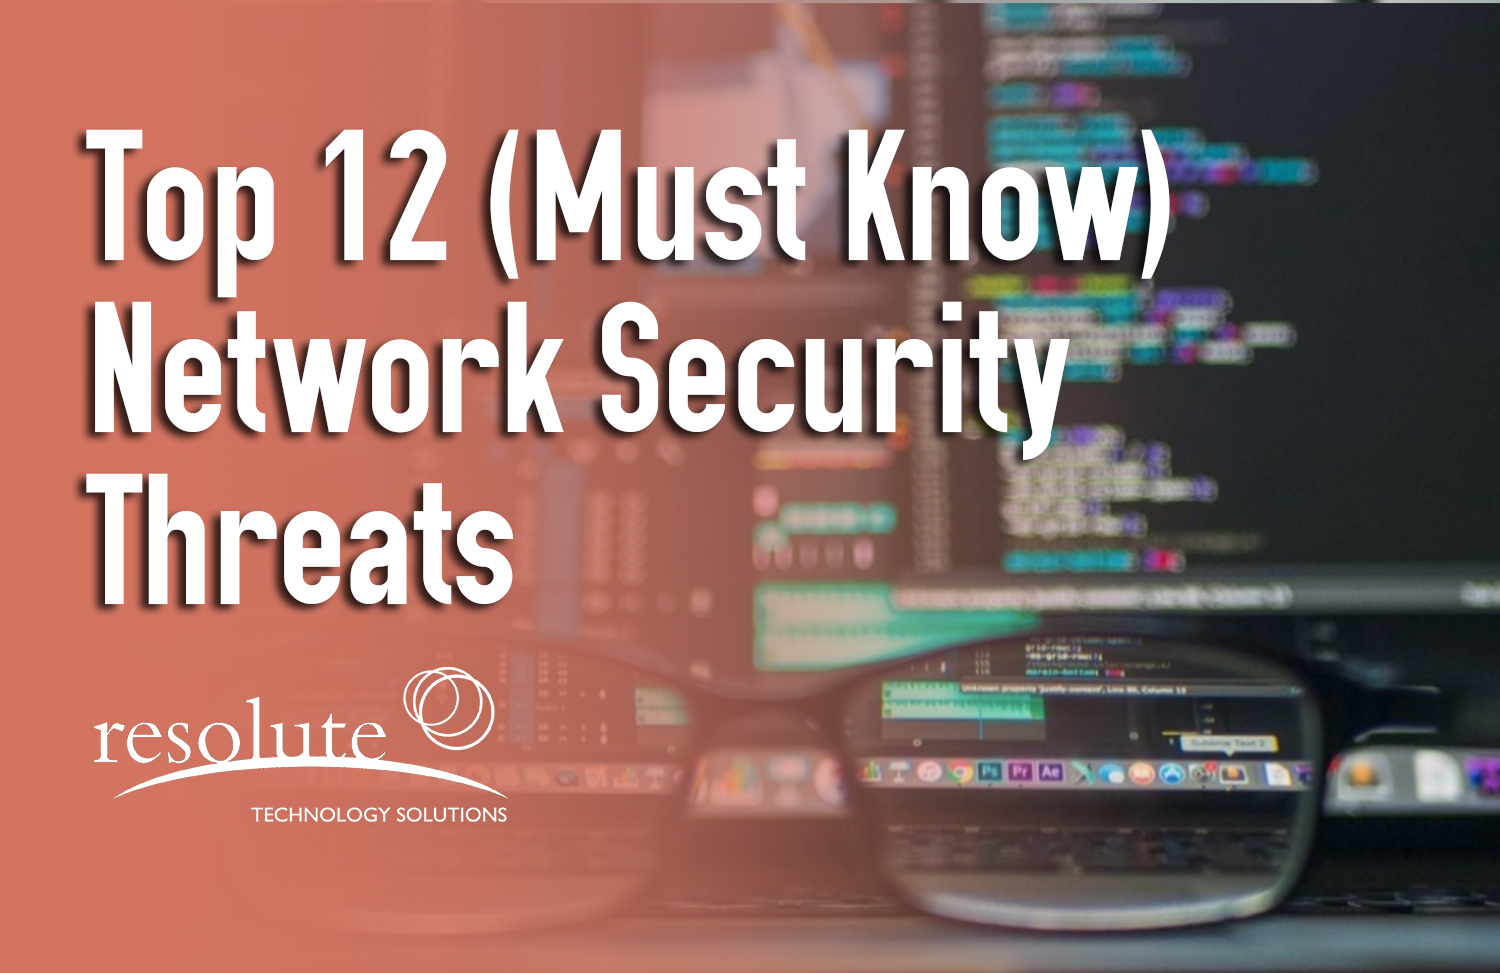 Top 12 (Must Know) Network Security Threats & Vulnerabilities